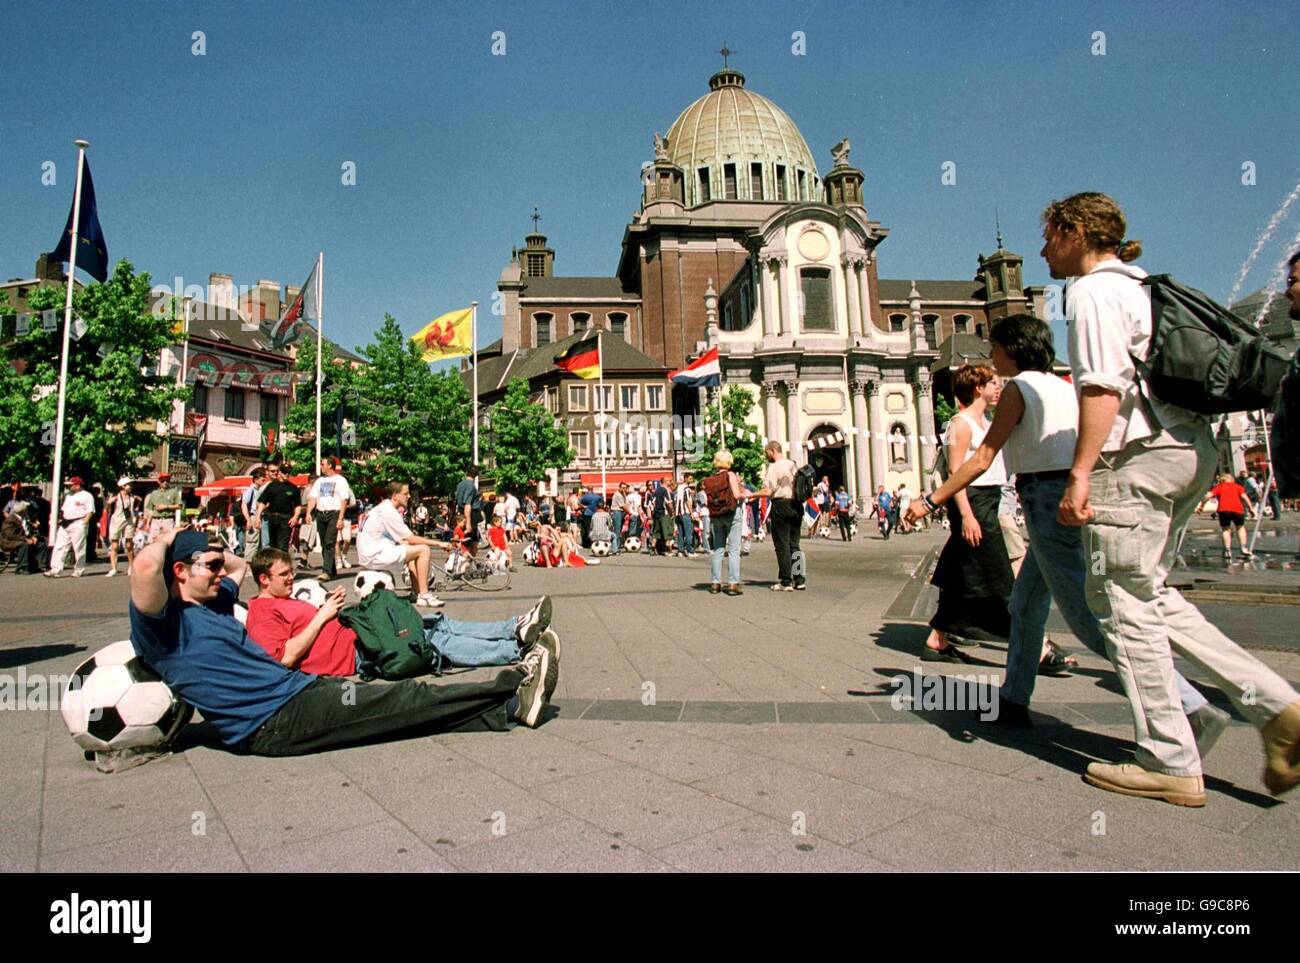 Soccer - Euro 2000 - Group C - Yugoslavia v Slovenia. Yugoslavian and Slovenian fans soak up the pre-match atmosphere in Charleroi's Place Charles II Stock Photo